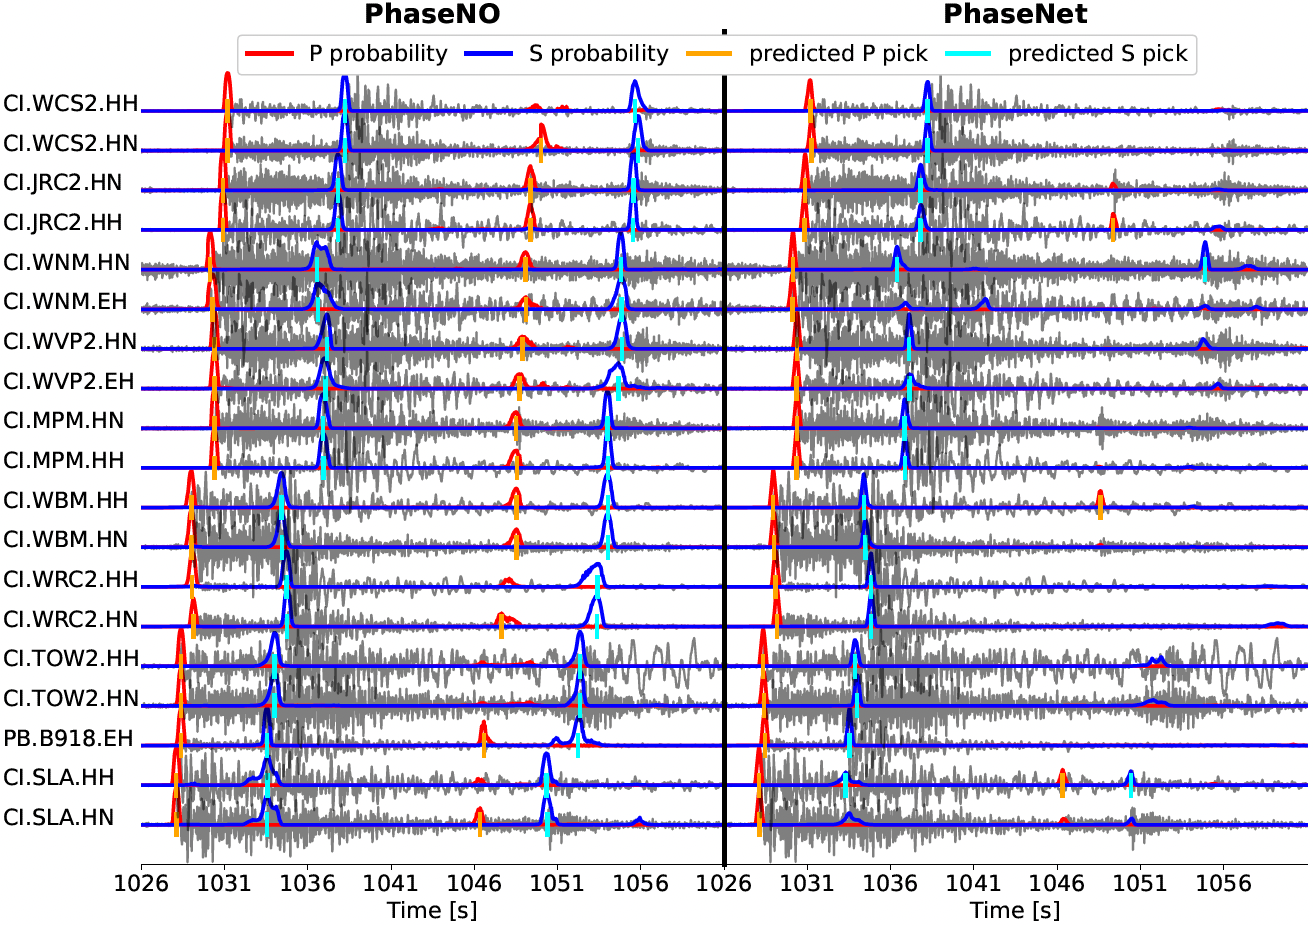 Example of continuous seismic data captured during the 2019 Ridgecrest earthquake sequence. PhaseNO detects an additional event compared with PhaseNet in a 35-s time window.
